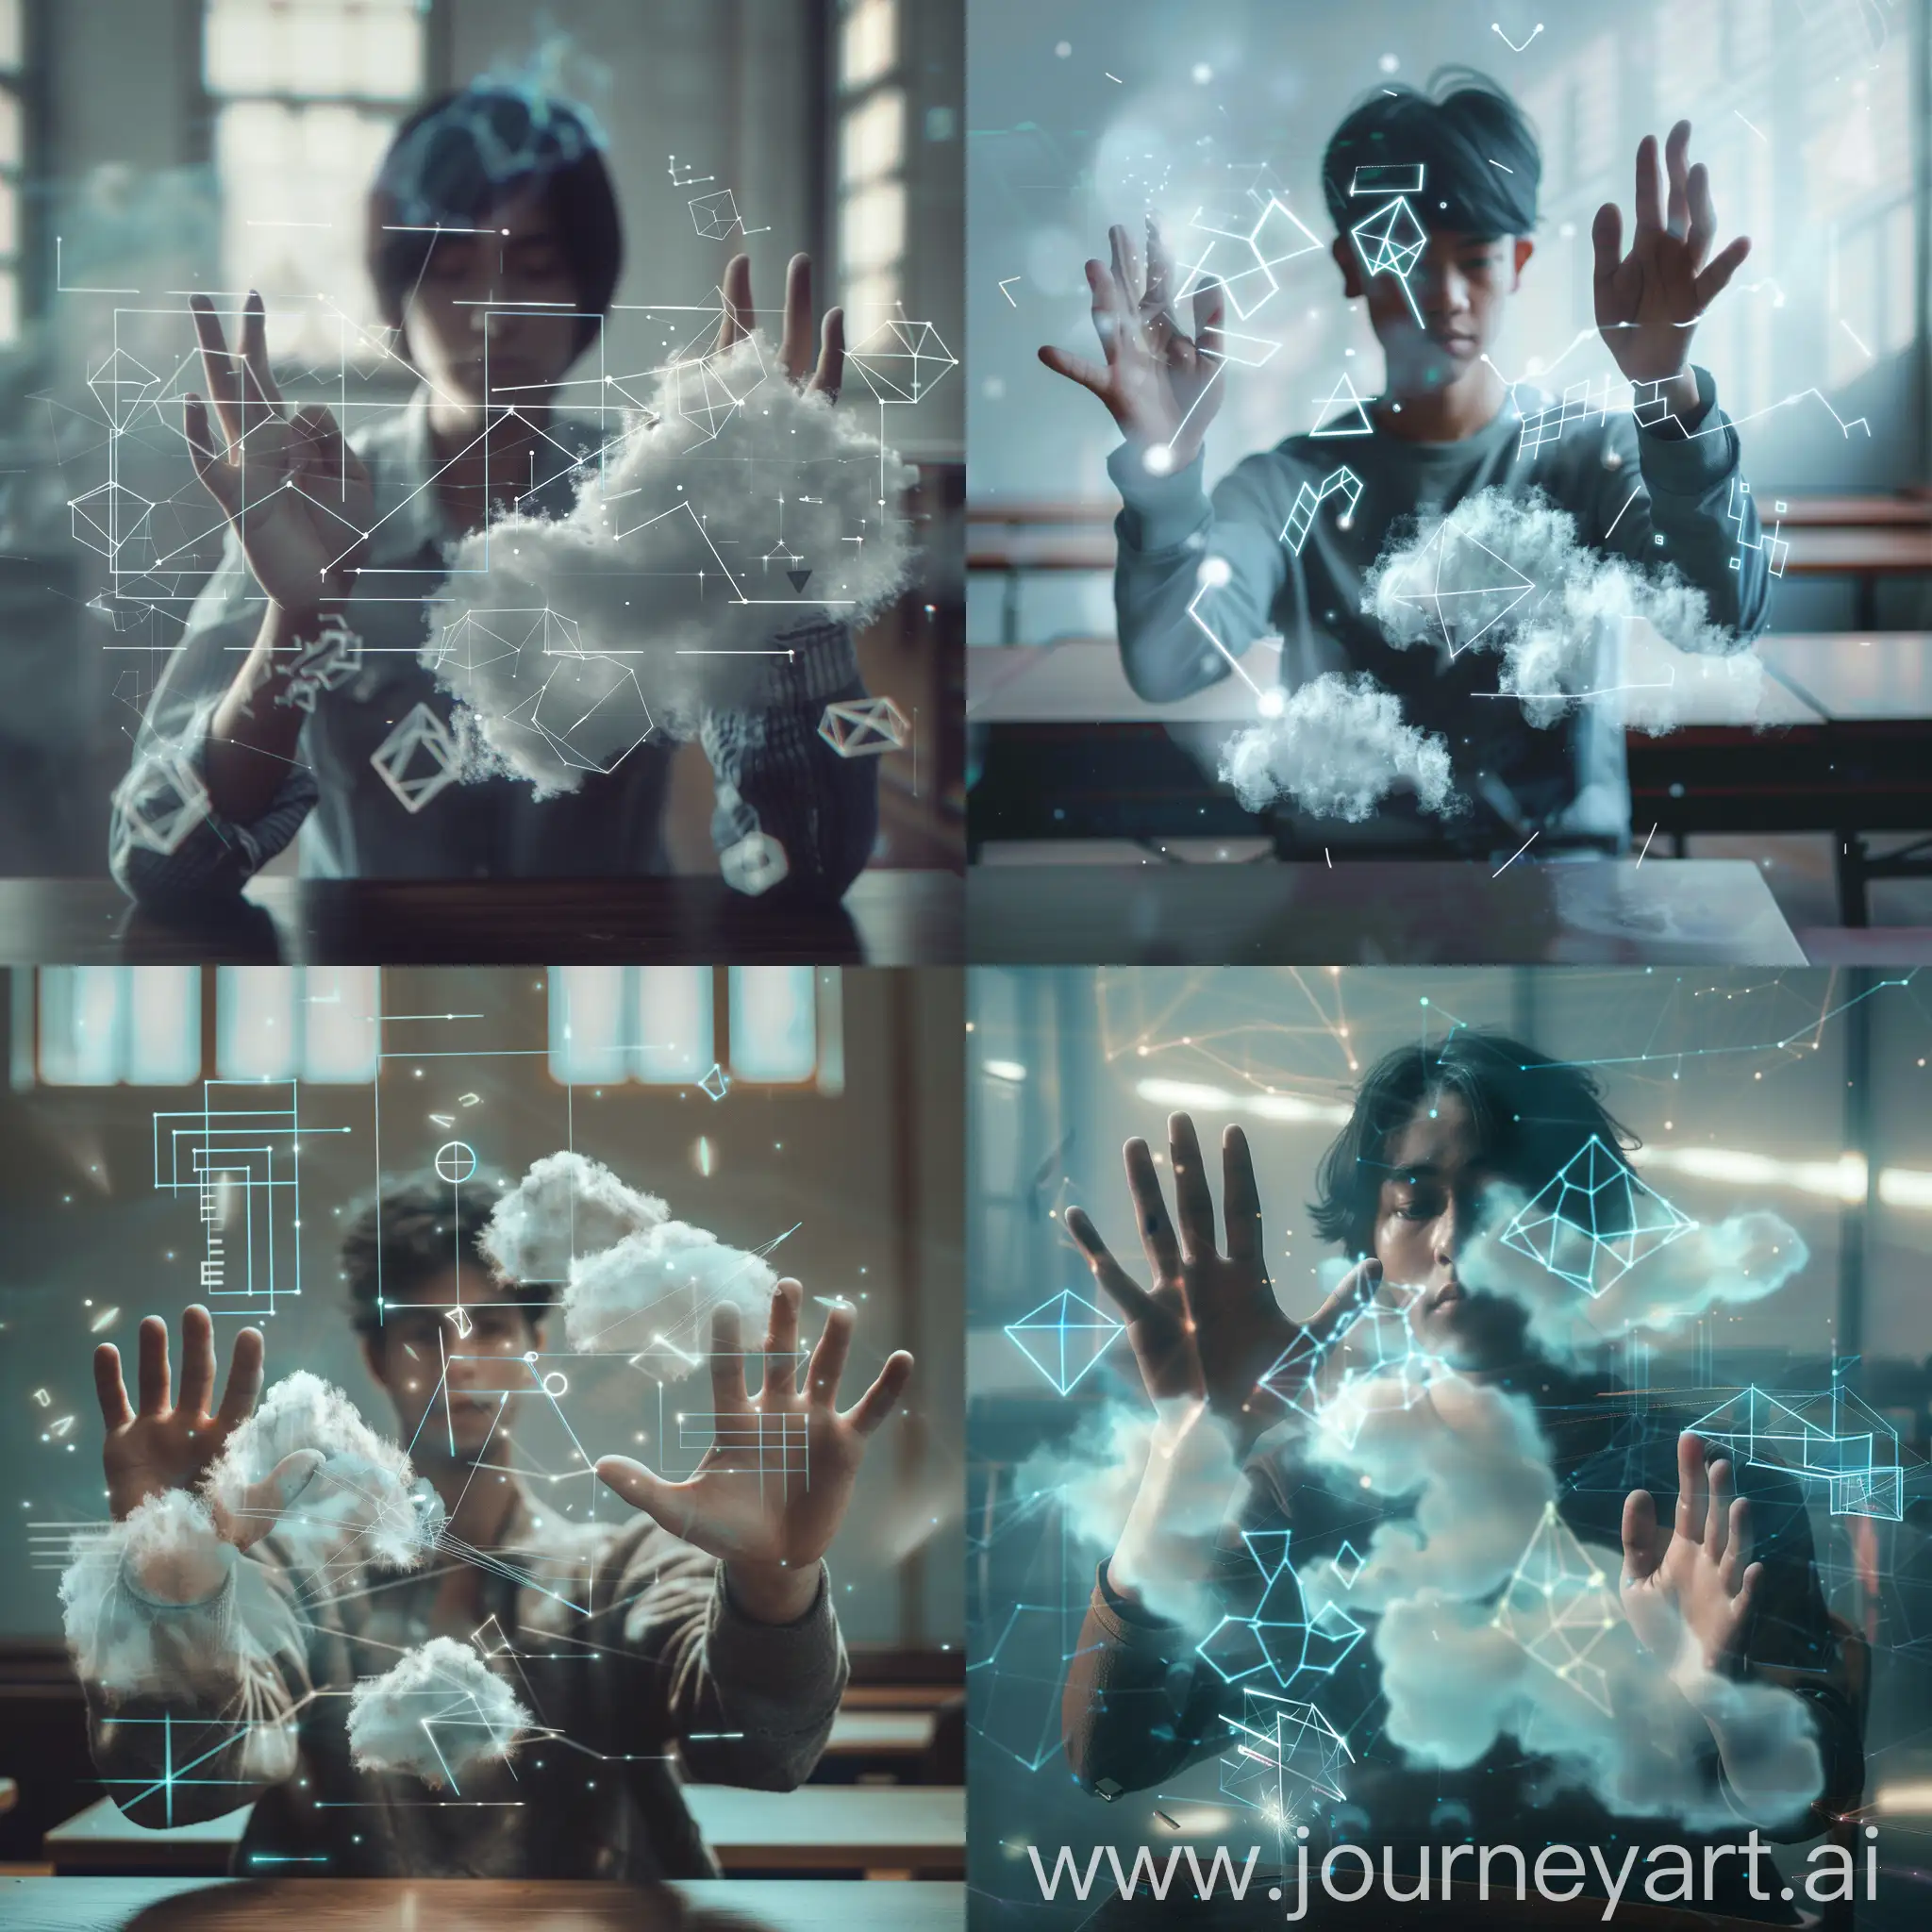 Hyper realistic photo of A person sitting in front of the camera hands raised, with  fuzzy cloud like shapes hovering, their hand over the shape, in an educational environment, engaging with a mid-air haptic interface. The image focuses on their upper body and hands as they interact with invisible virtual geometric shapes and mathematical figures, which are indicated by their focused gaze and hand movements in the empty space in front of them. The person is surrounded by a futuristic classroom setting, illuminated with soft, ambient lighting. The scene captures the essence of innovative learning, showcasing how technology enables interaction with digital content without physical contact, bridging the physical and digital worlds.